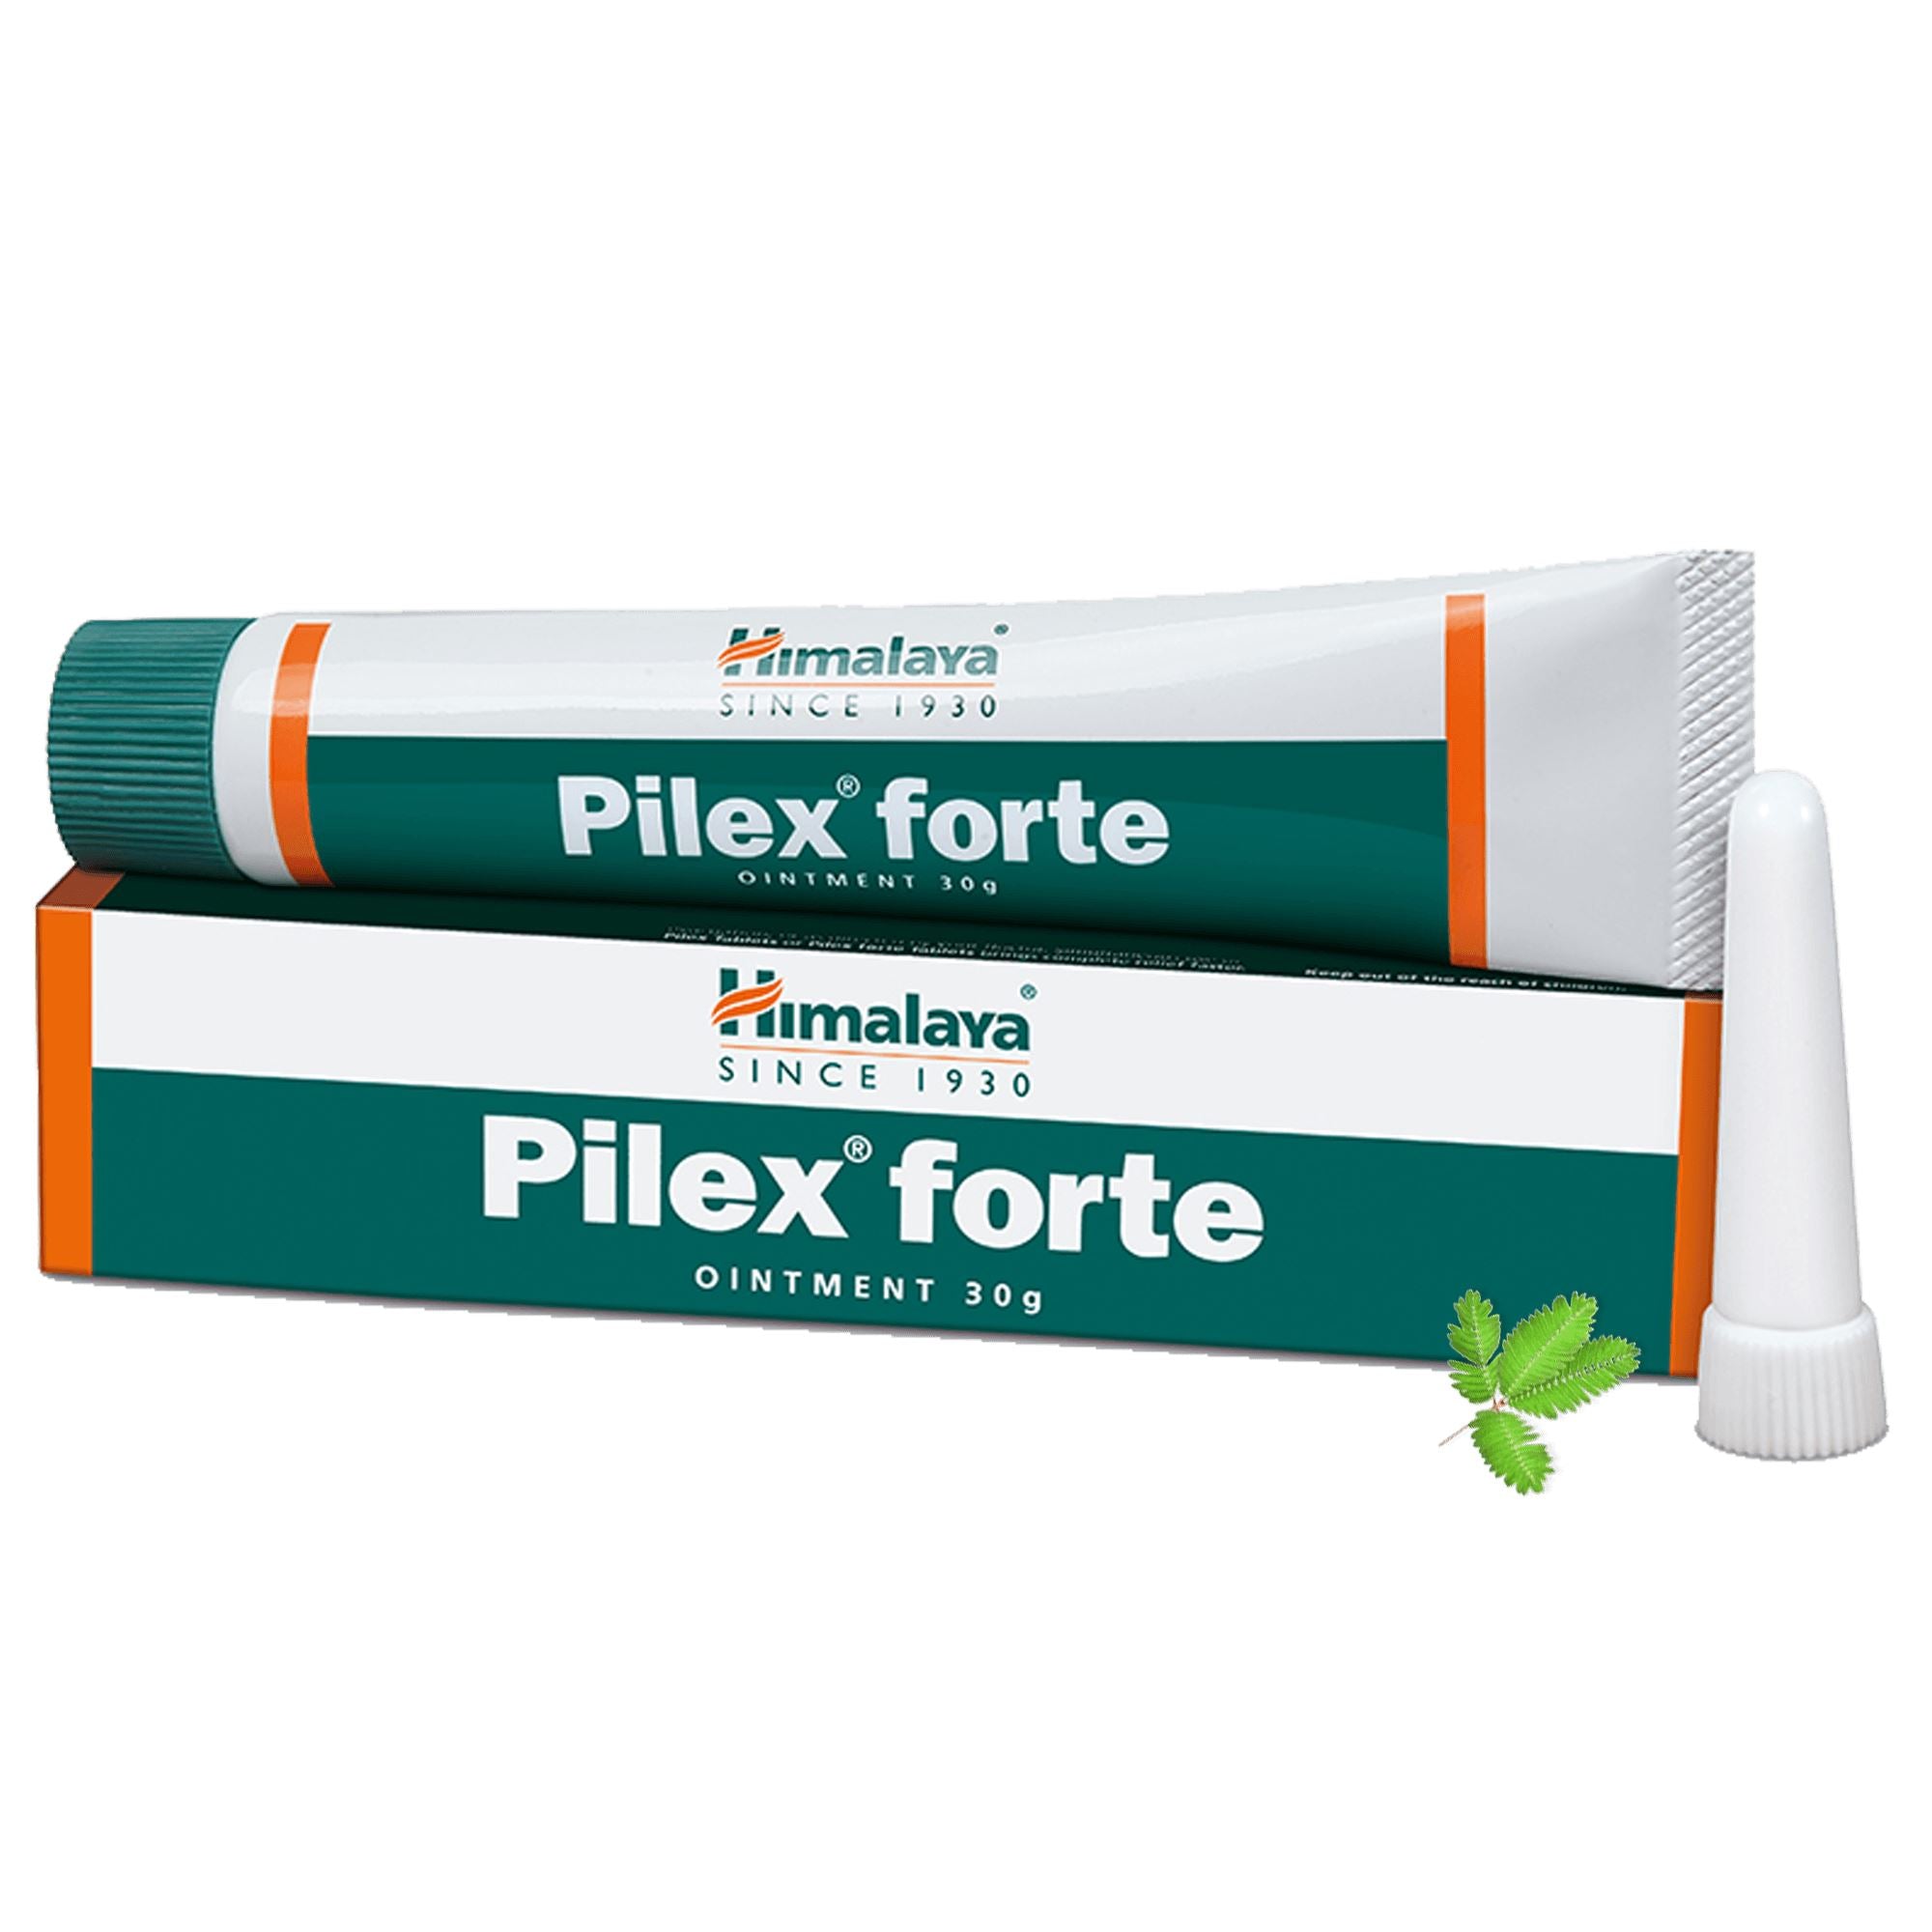 Himalaya Pilex forte Ointment - Offers relief from rectal bleeding, pain, and corrects chronic constipation